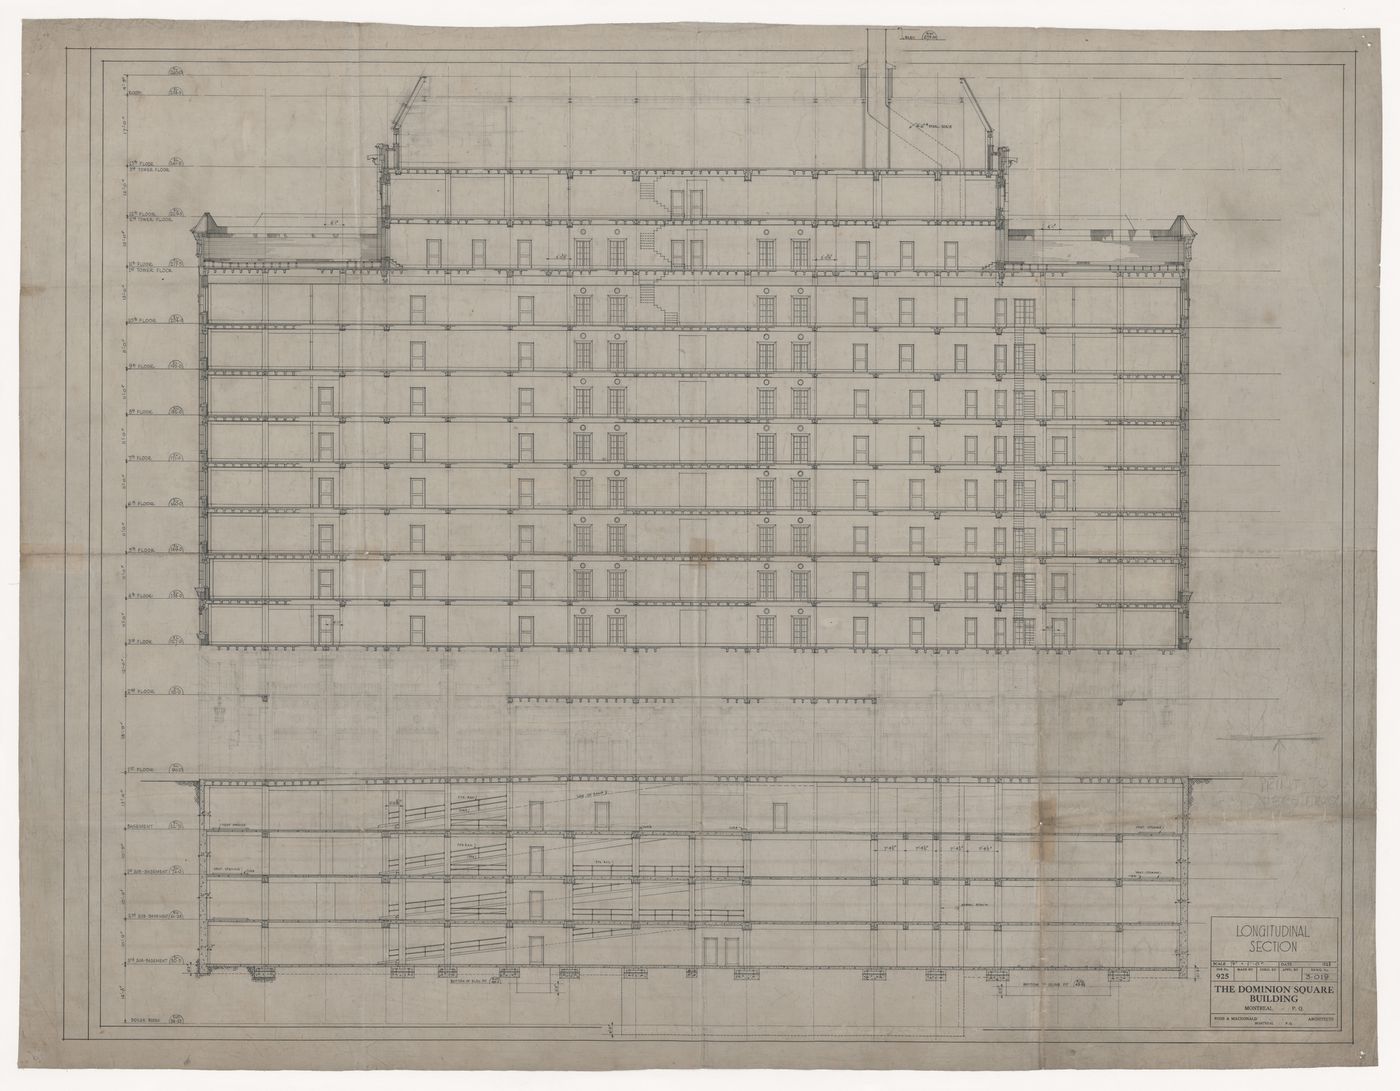 Longitudinal section for Dominion Square Building, Montreal, Québec